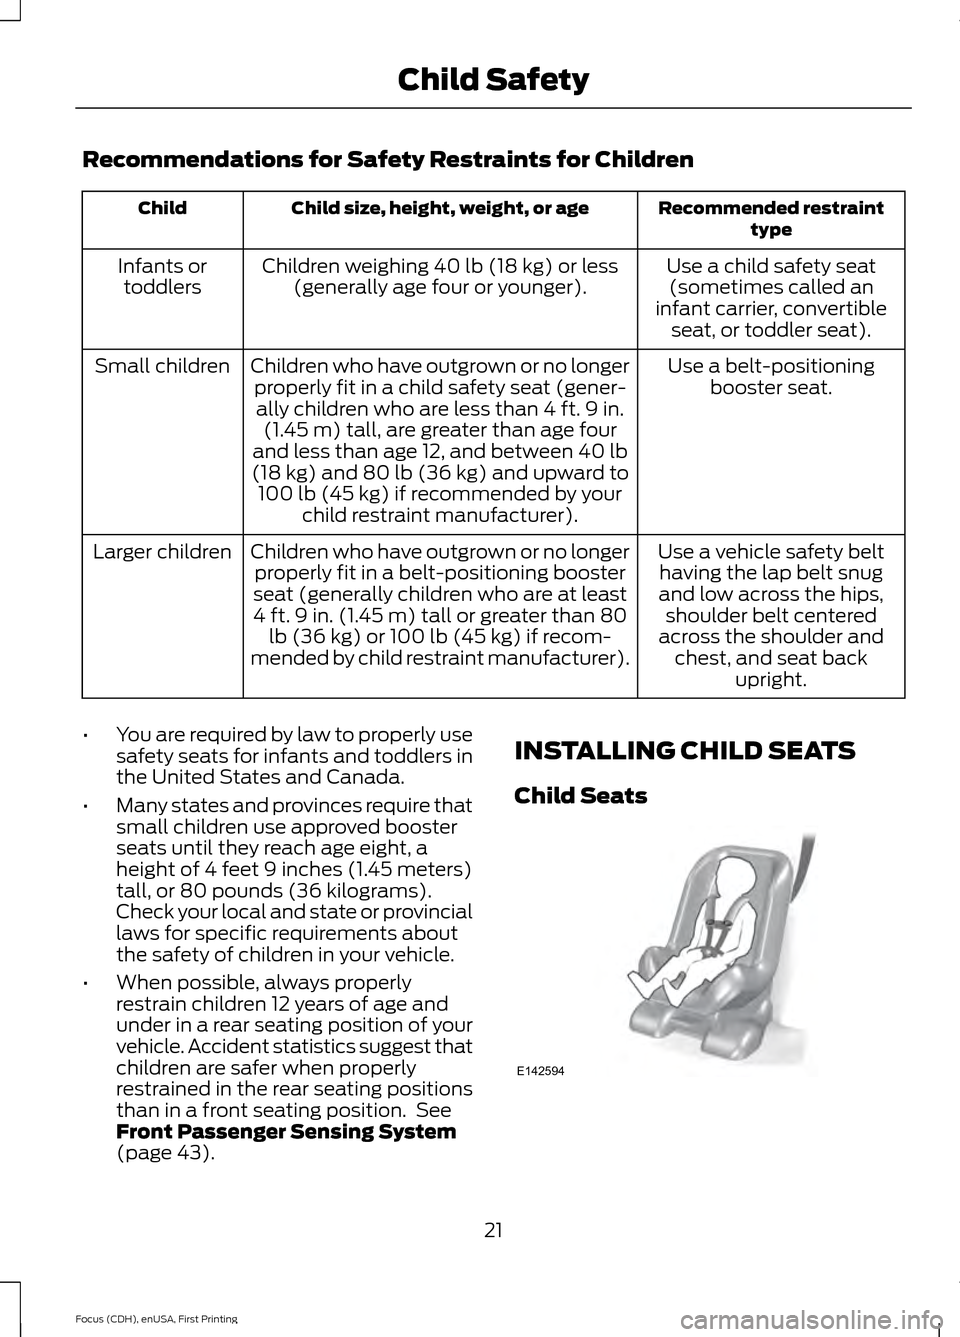 FORD FOCUS 2015 3.G Owners Manual Recommendations for Safety Restraints for Children
Recommended restraint
type
Child size, height, weight, or age
Child
Use a child safety seat(sometimes called an
infant carrier, convertible seat, or 